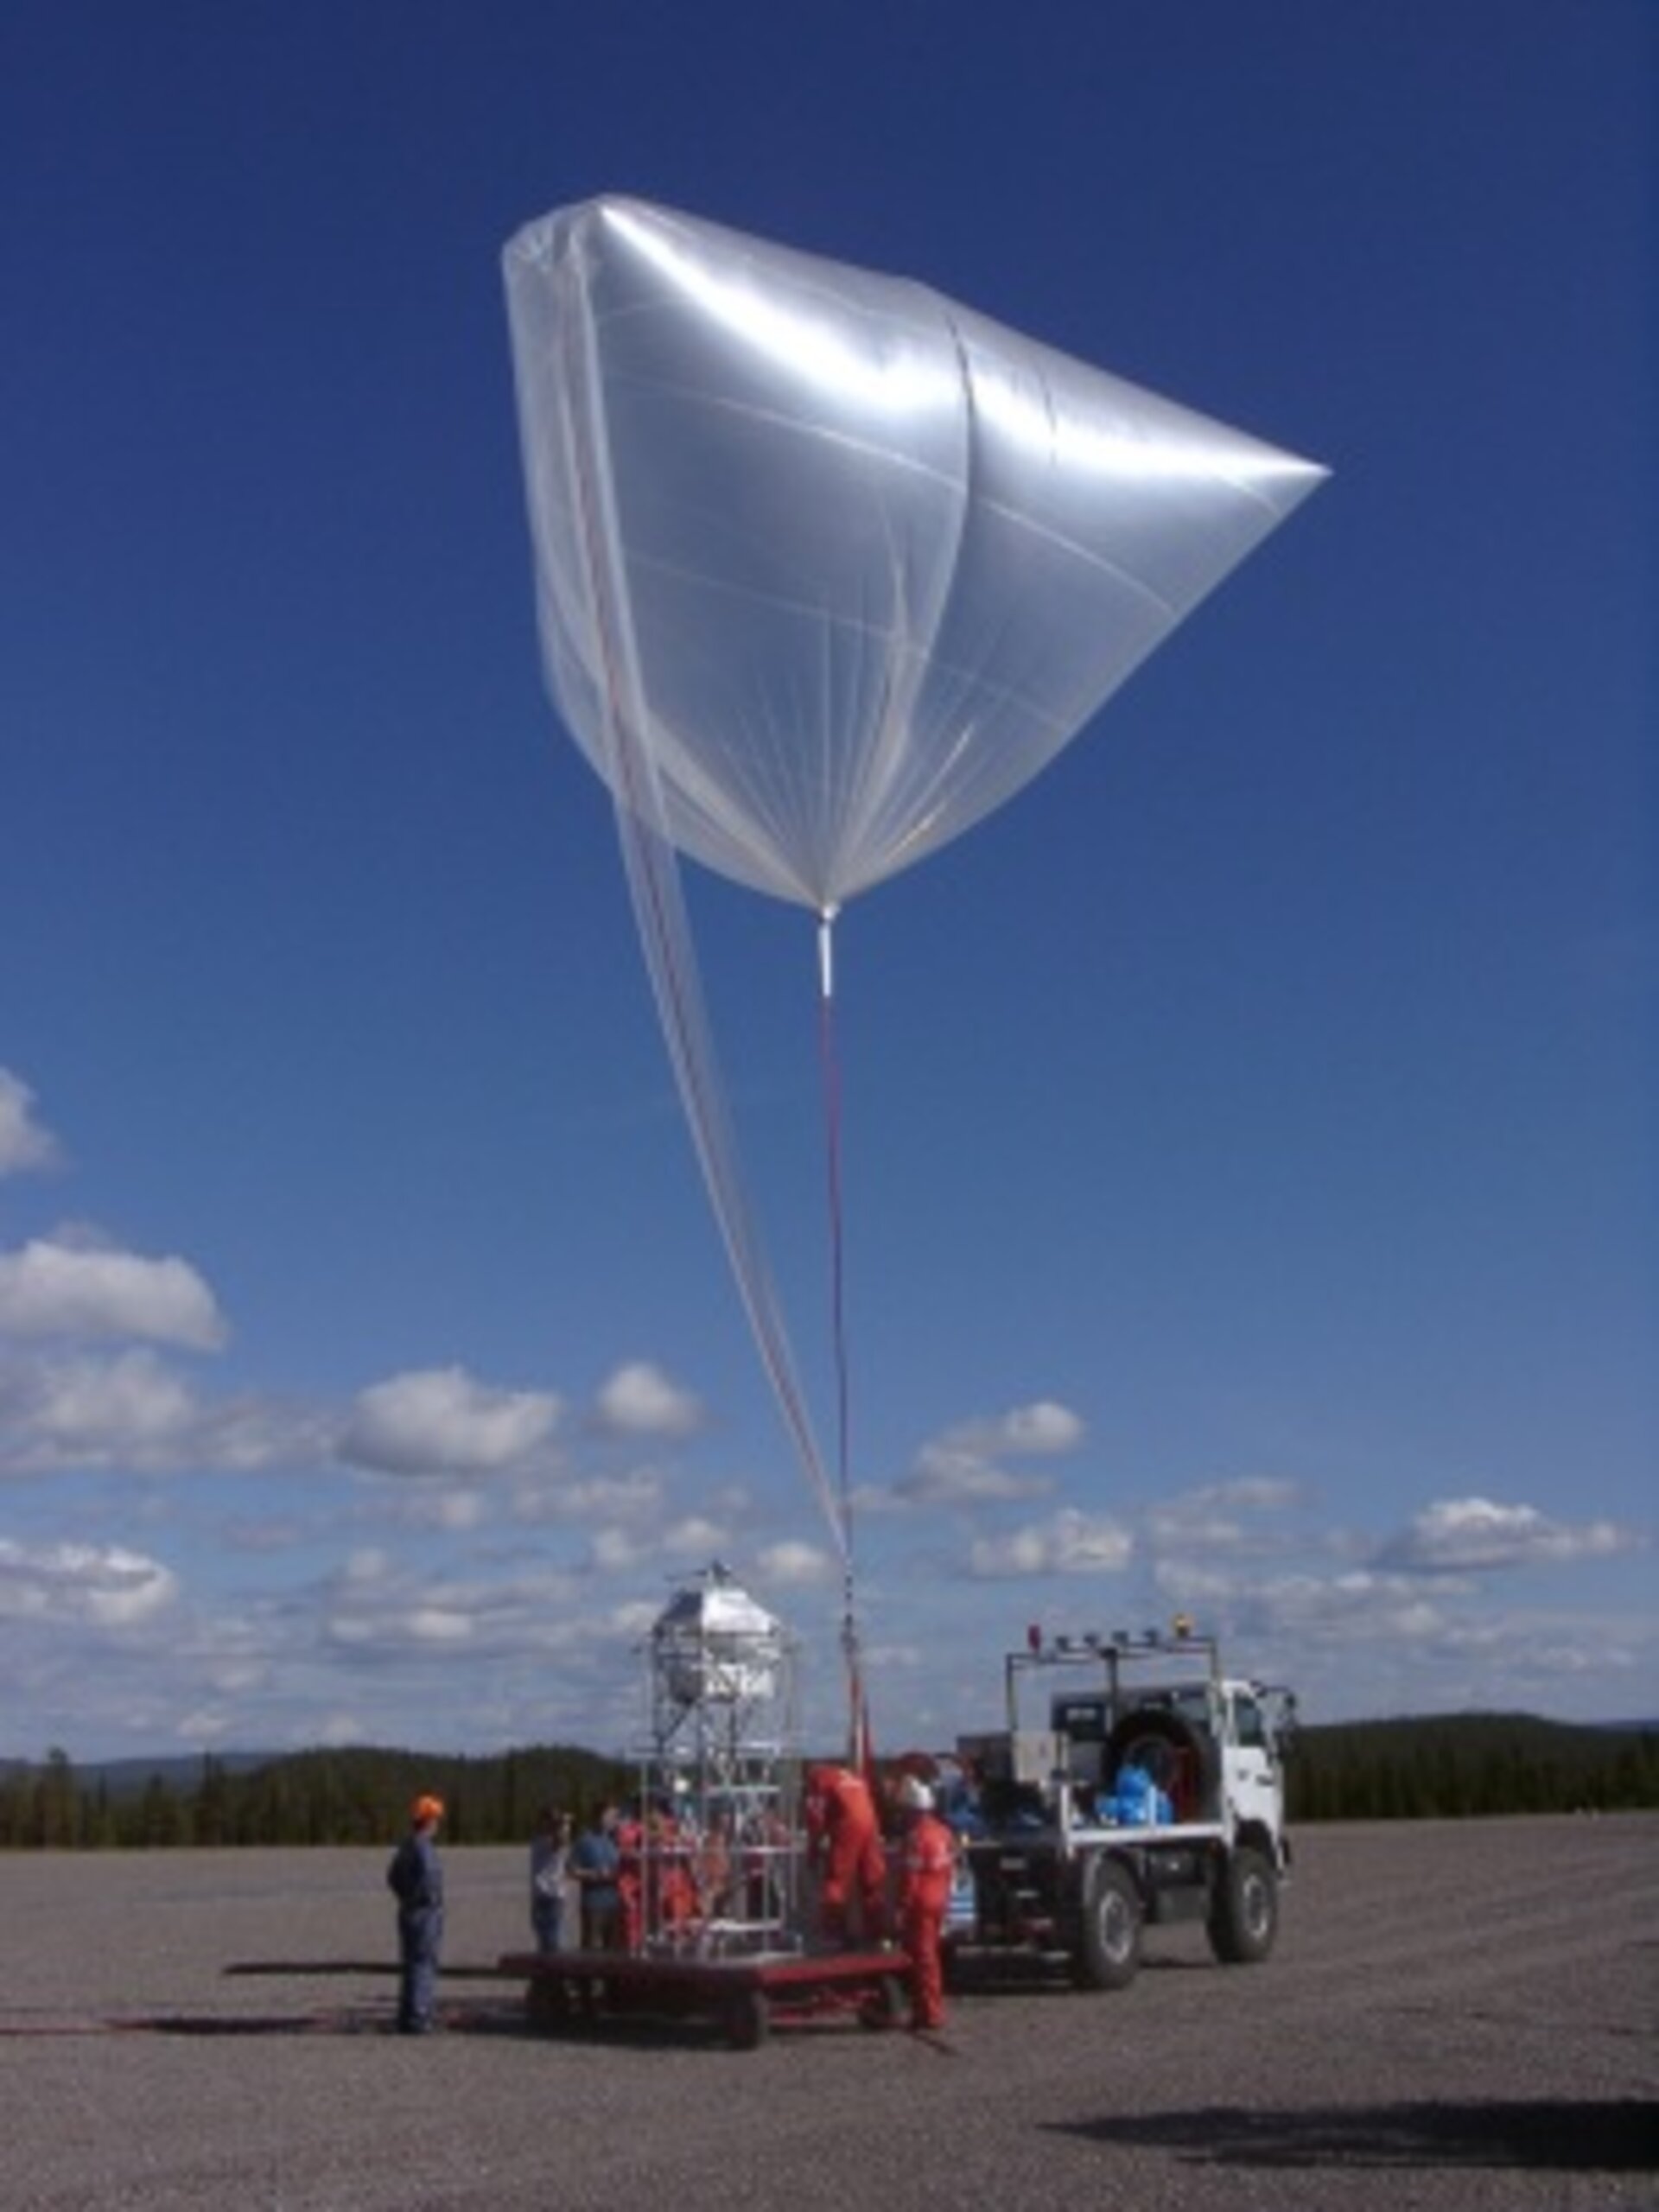 One of the larger instruments being connected to the auxiliary balloon